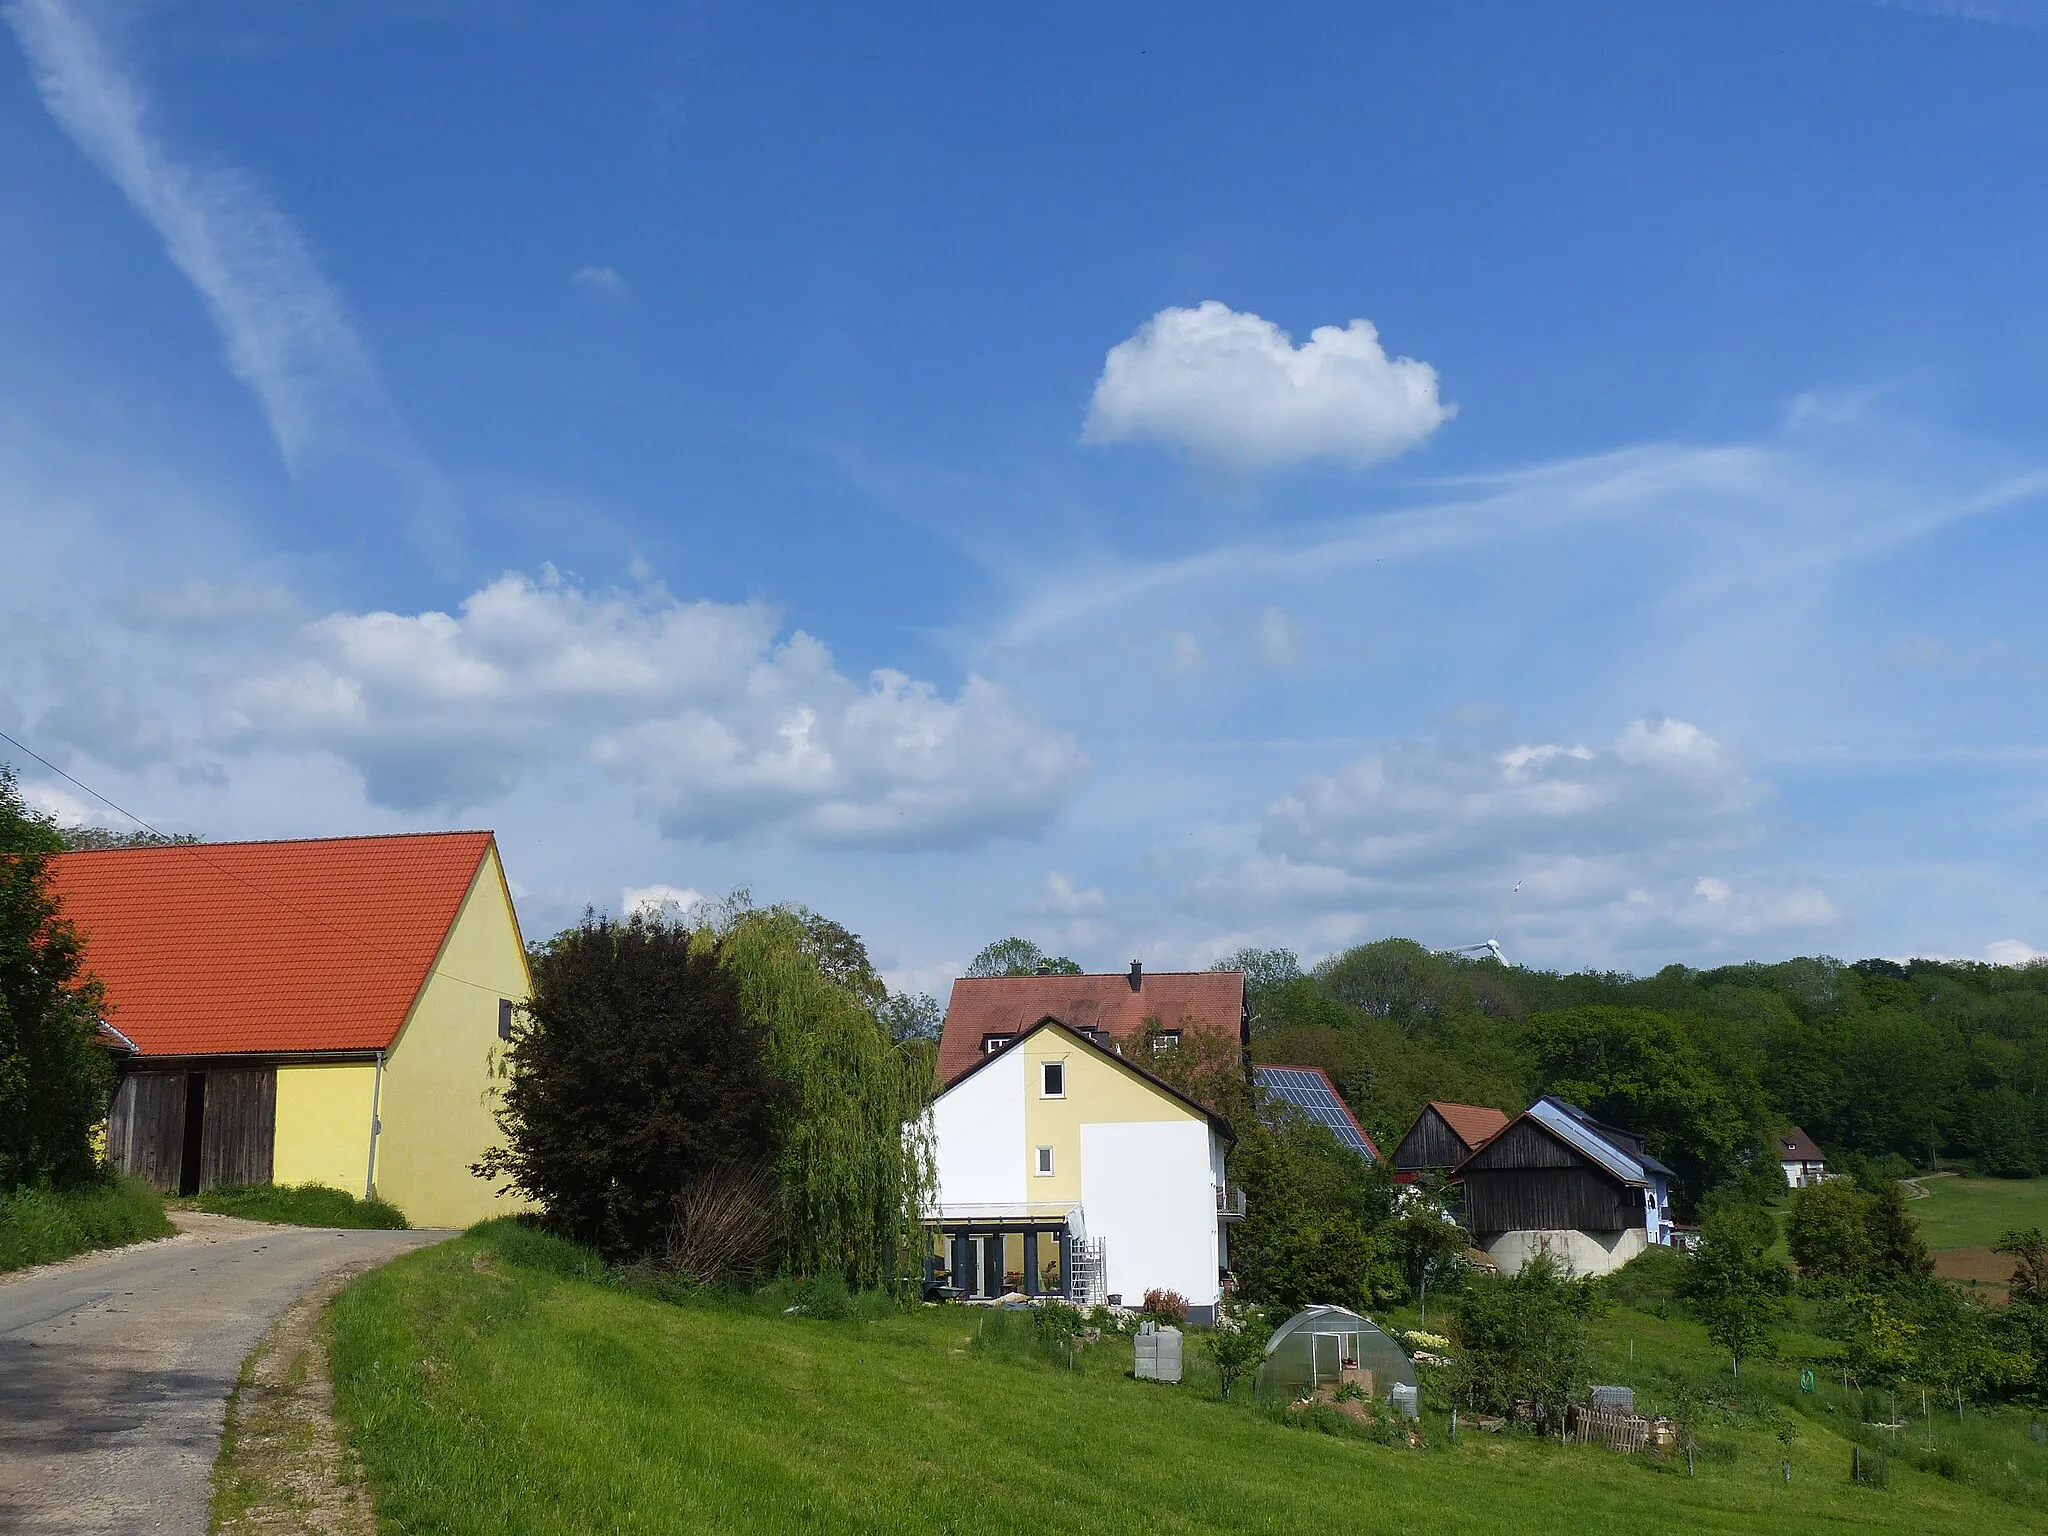 Photo showing: The hamlet Rangen, a district of the town of Gräfenberg